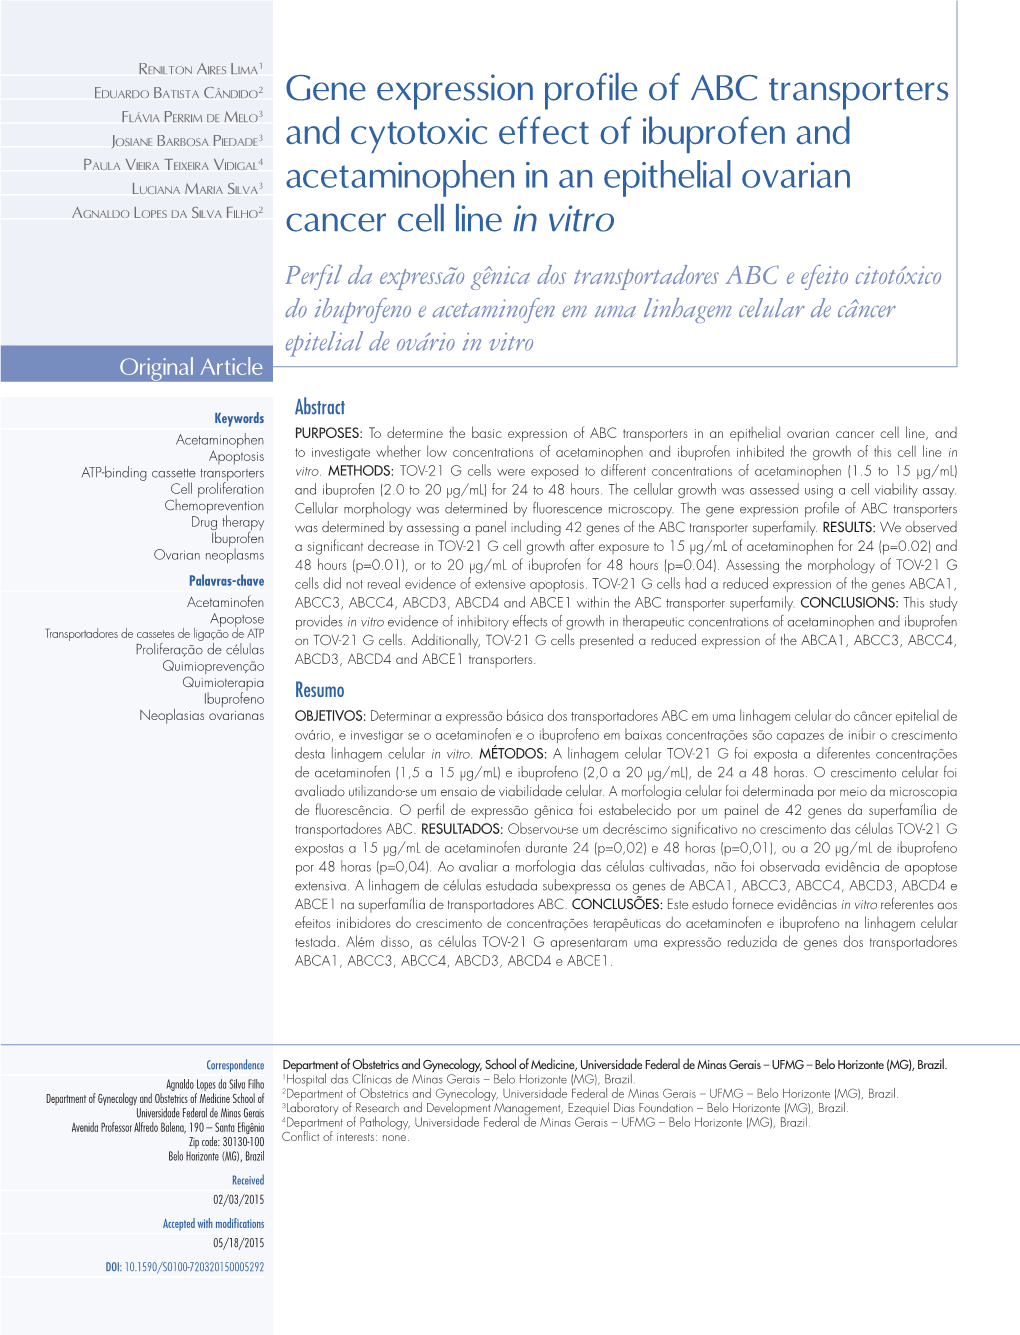 Gene Expression Profile of ABC Transporters and Cytotoxic Effect of Ibuprofen and Acetaminophen in an Epithelial Ovarian Cancer Cell Line in Vitro